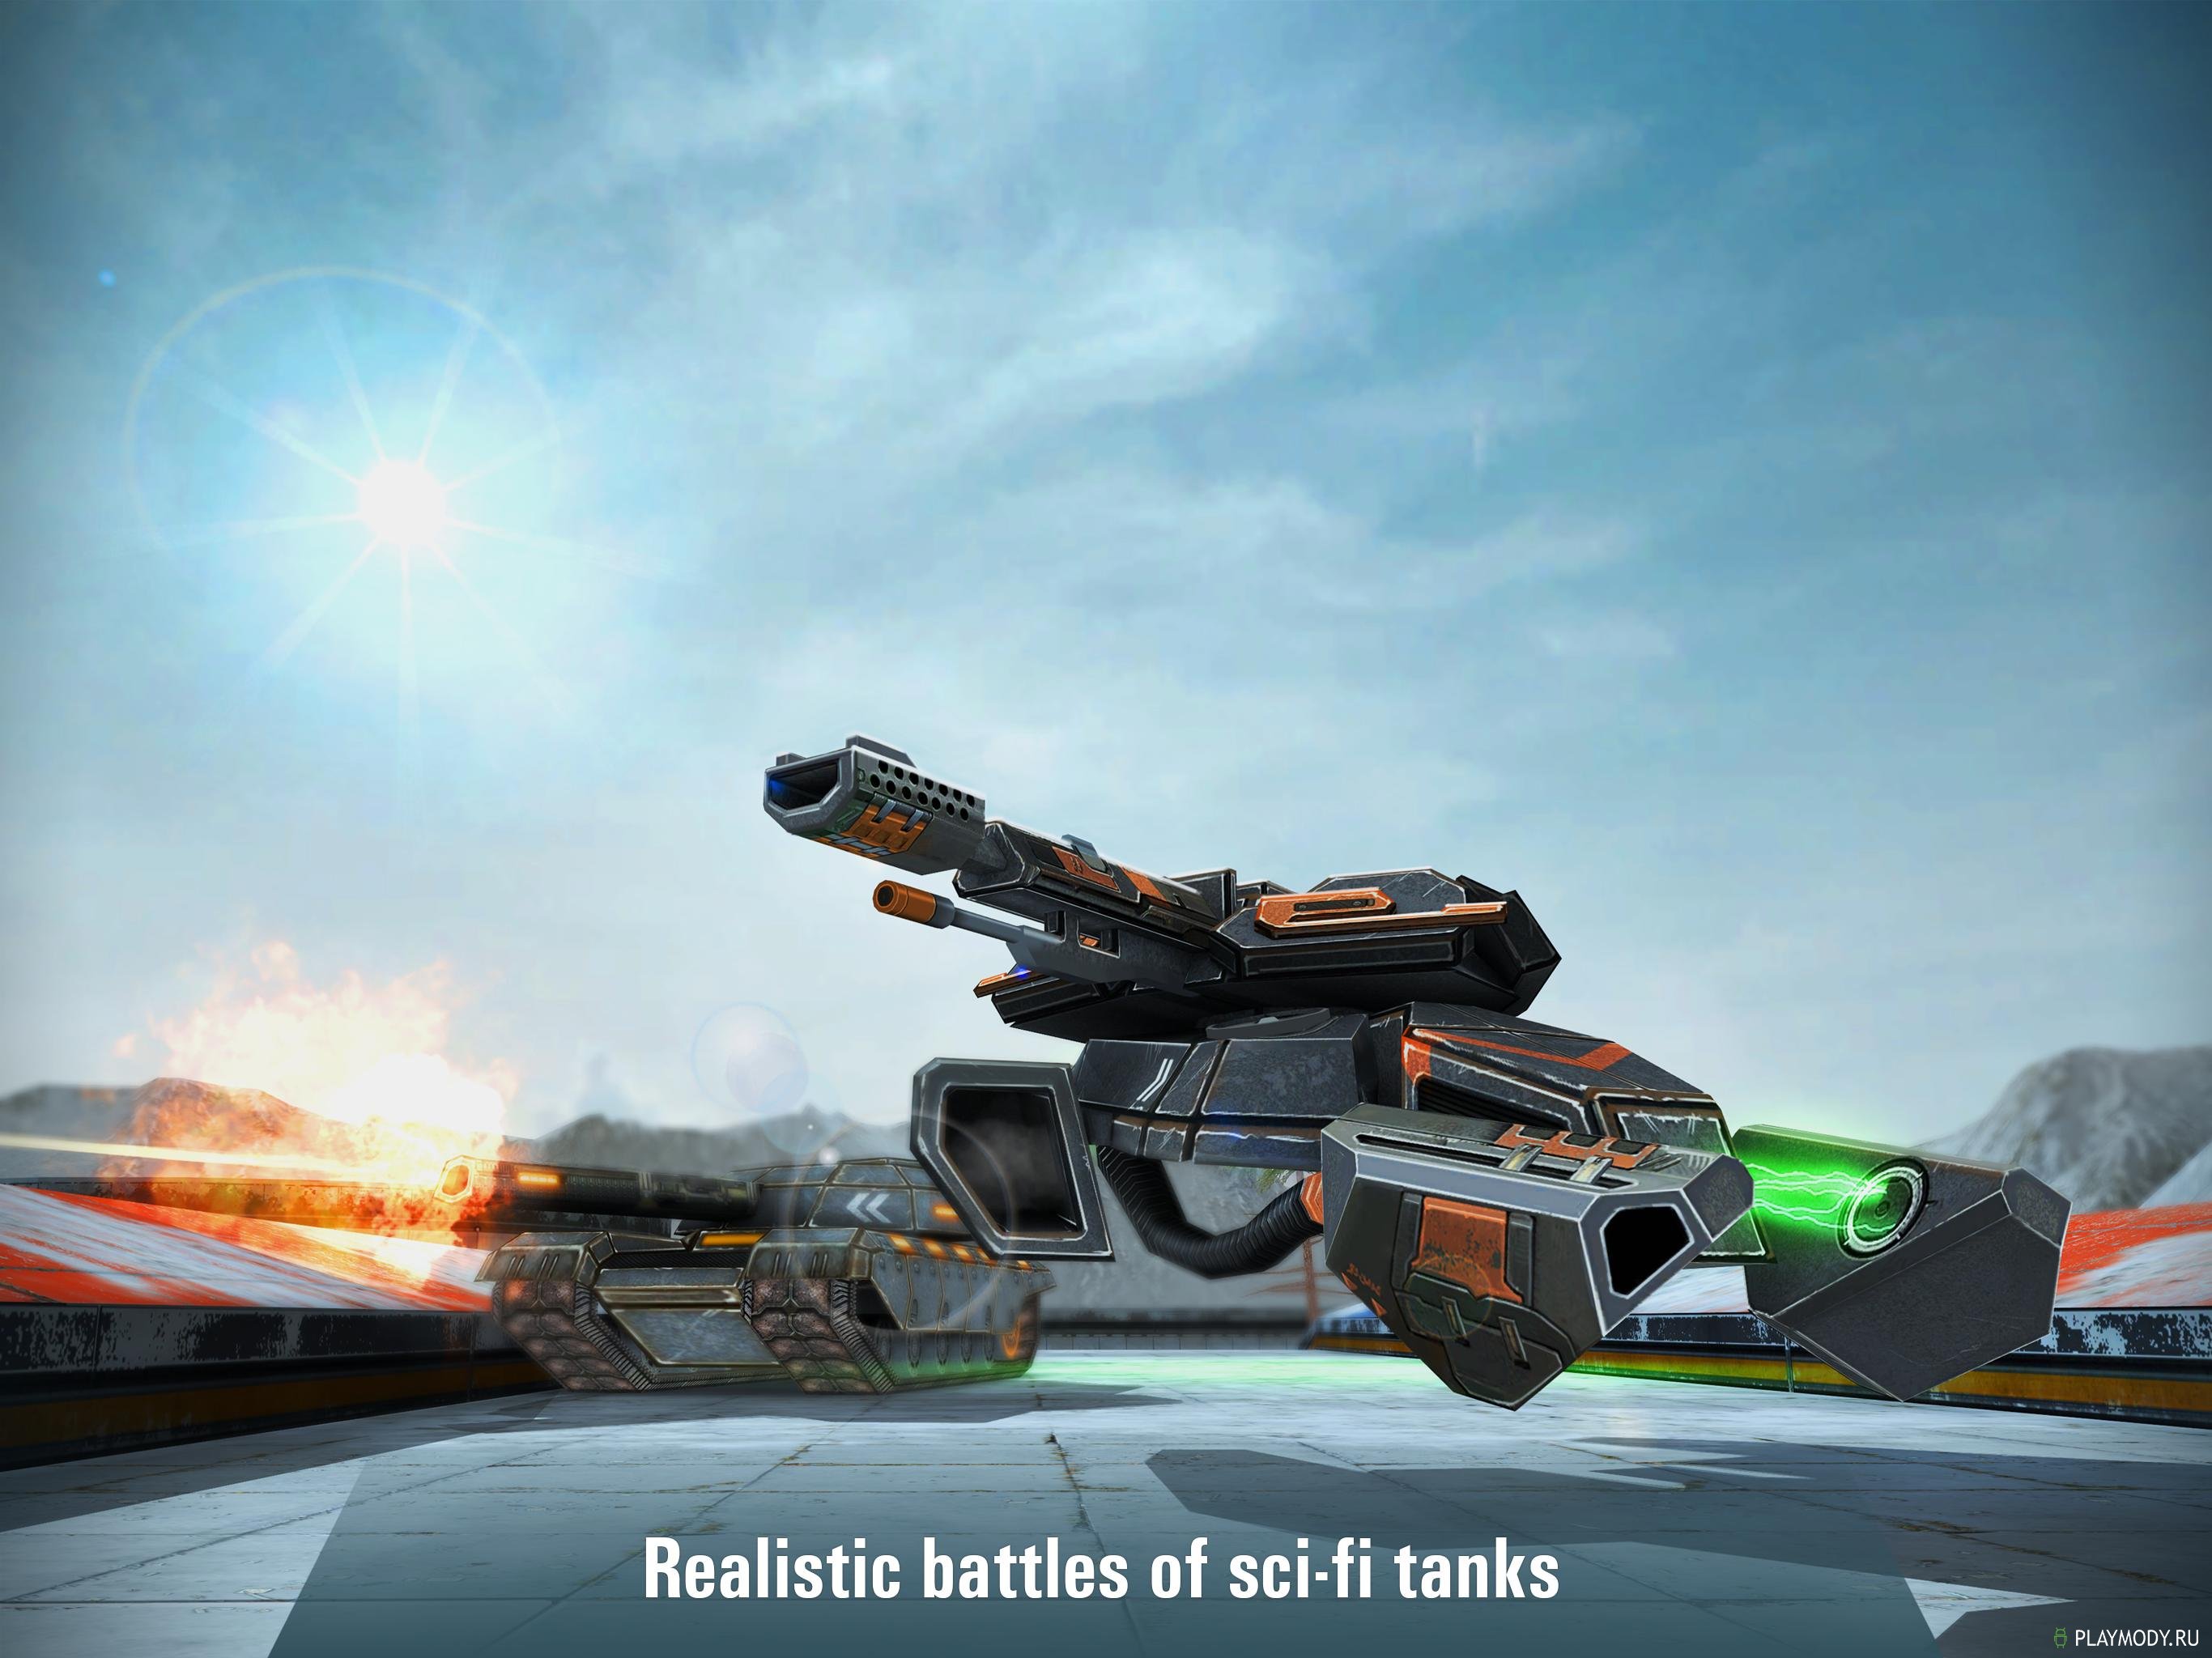 instal the last version for ios Iron Tanks: Tank War Game